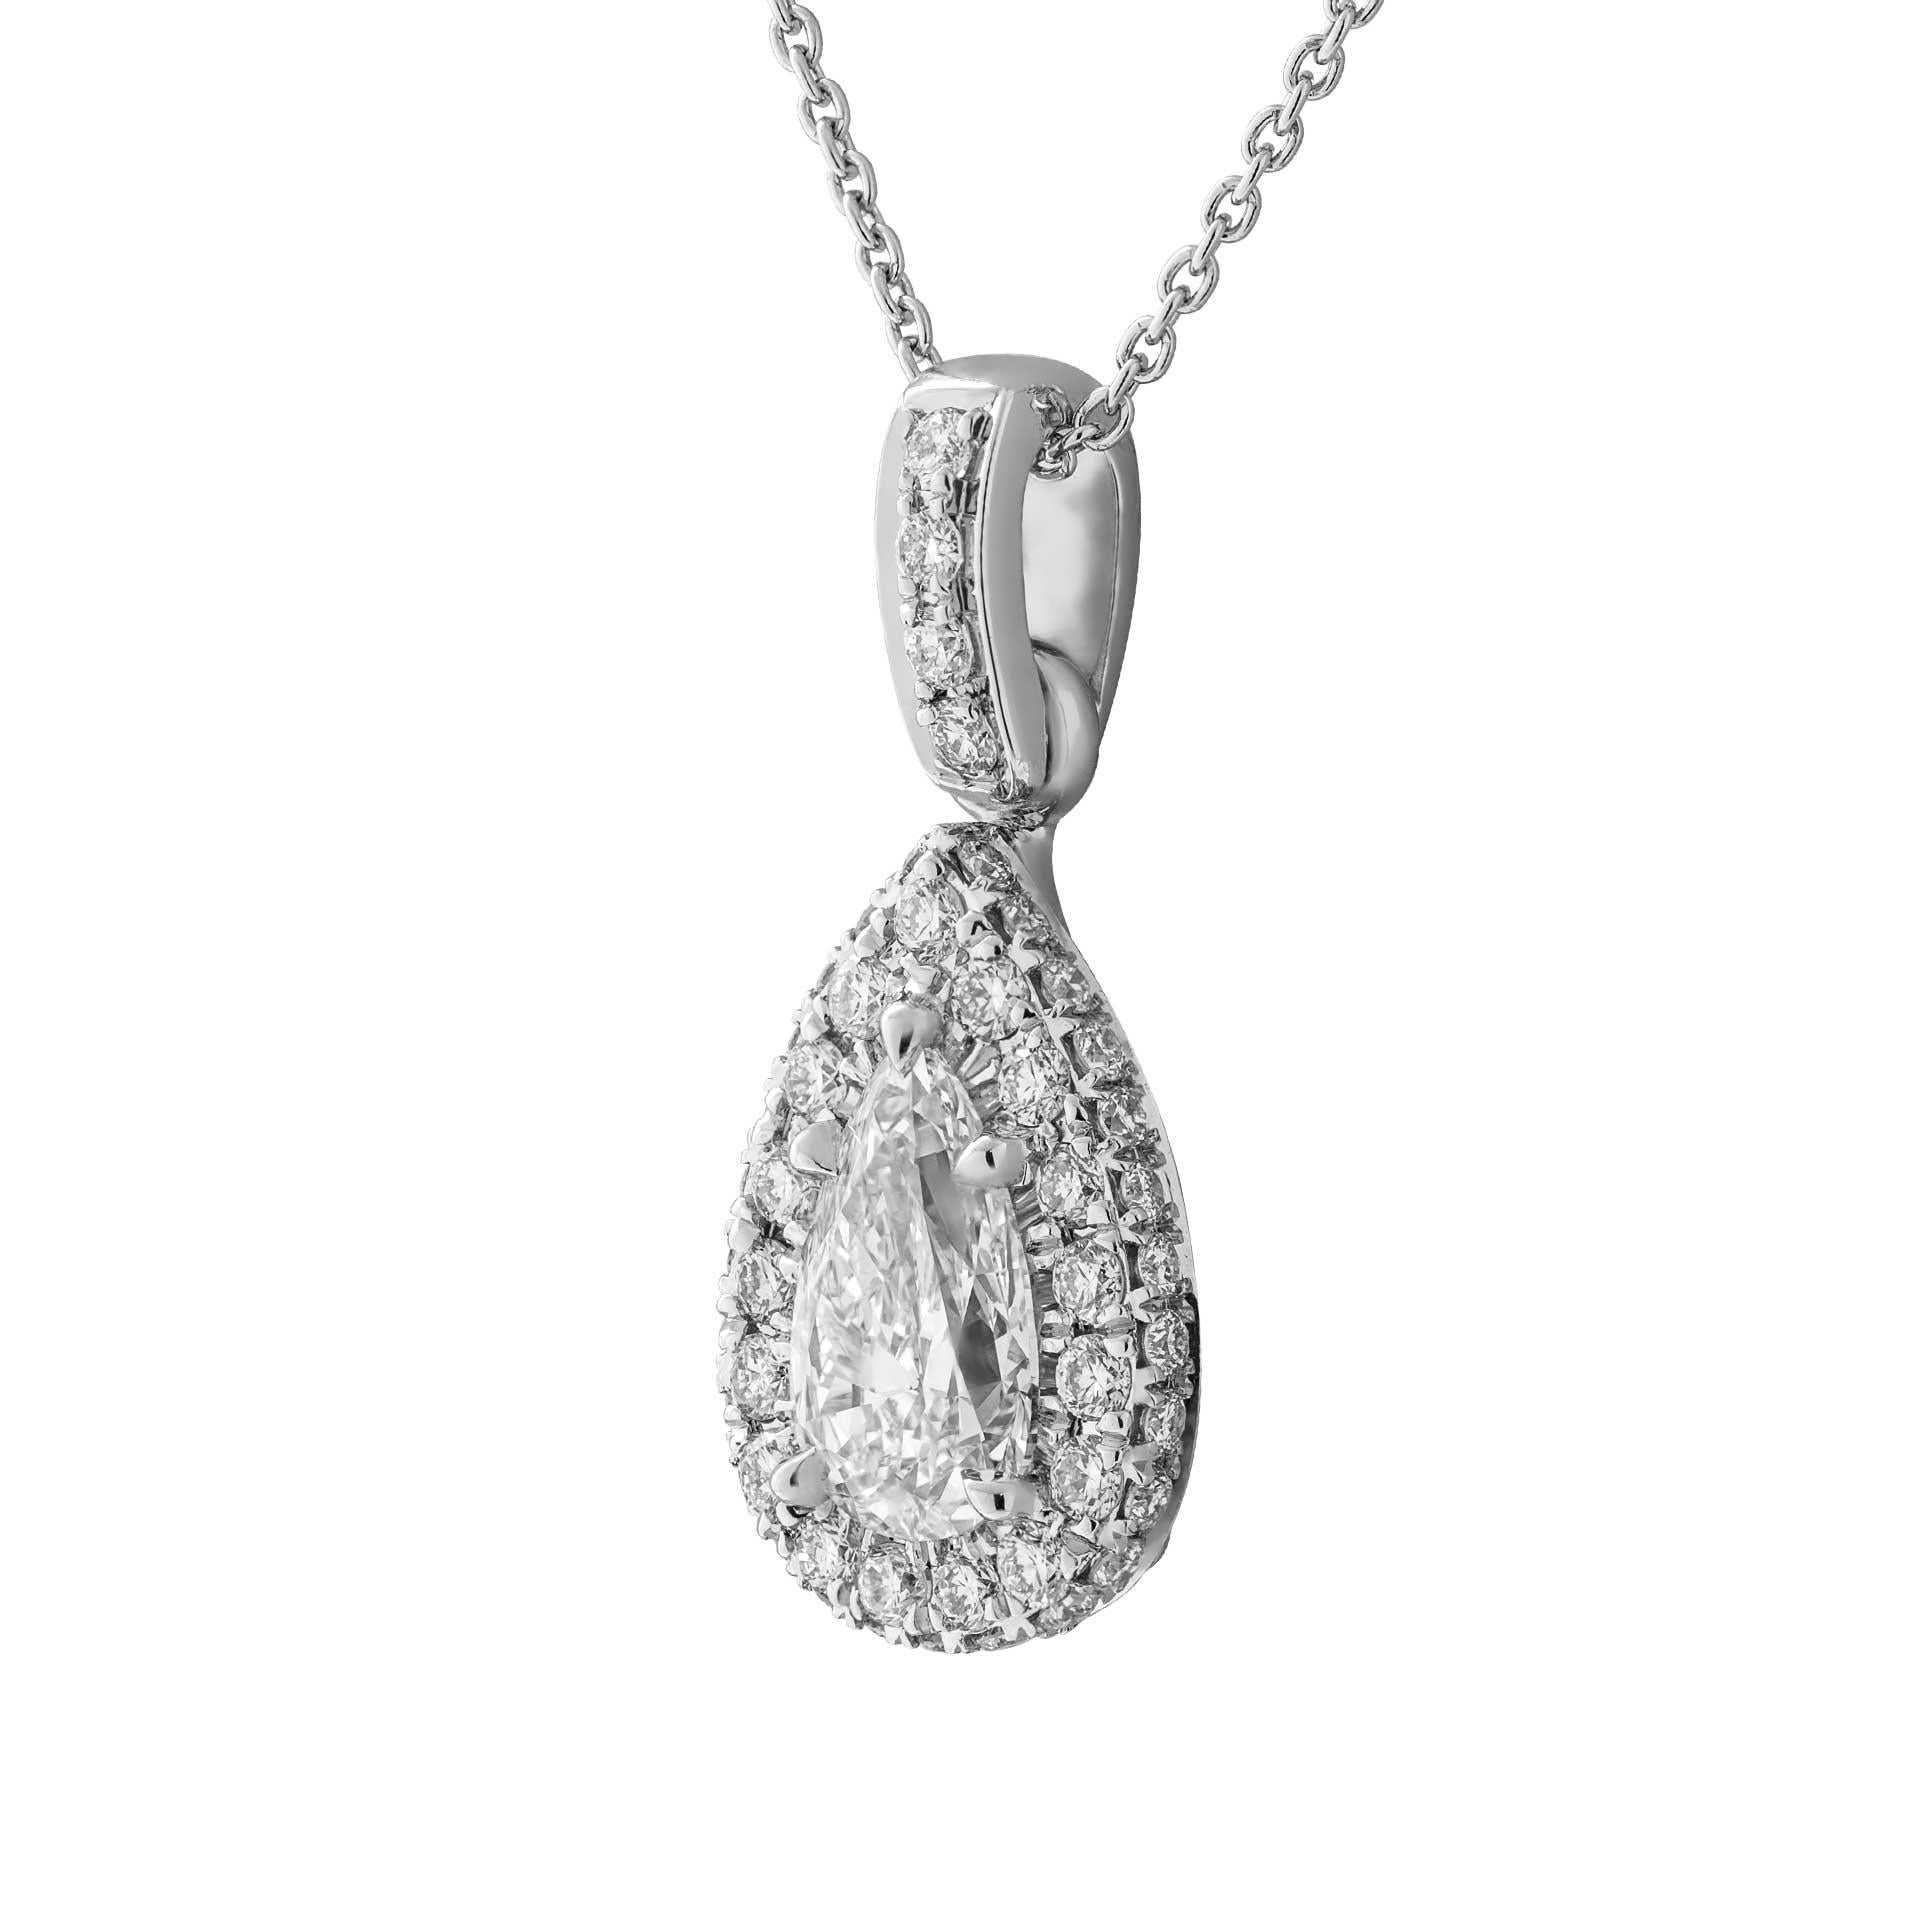 A timeless classic !
Beautiful Pear Shape Diamond Pendant with  diamond halo around to highlight the beauty of the stone, totaling 0.45ct of full brilliant cut round diamonds mounted in Platinum950 
Center stone:  0.83ct H VS2 Pear GIA#2387336534